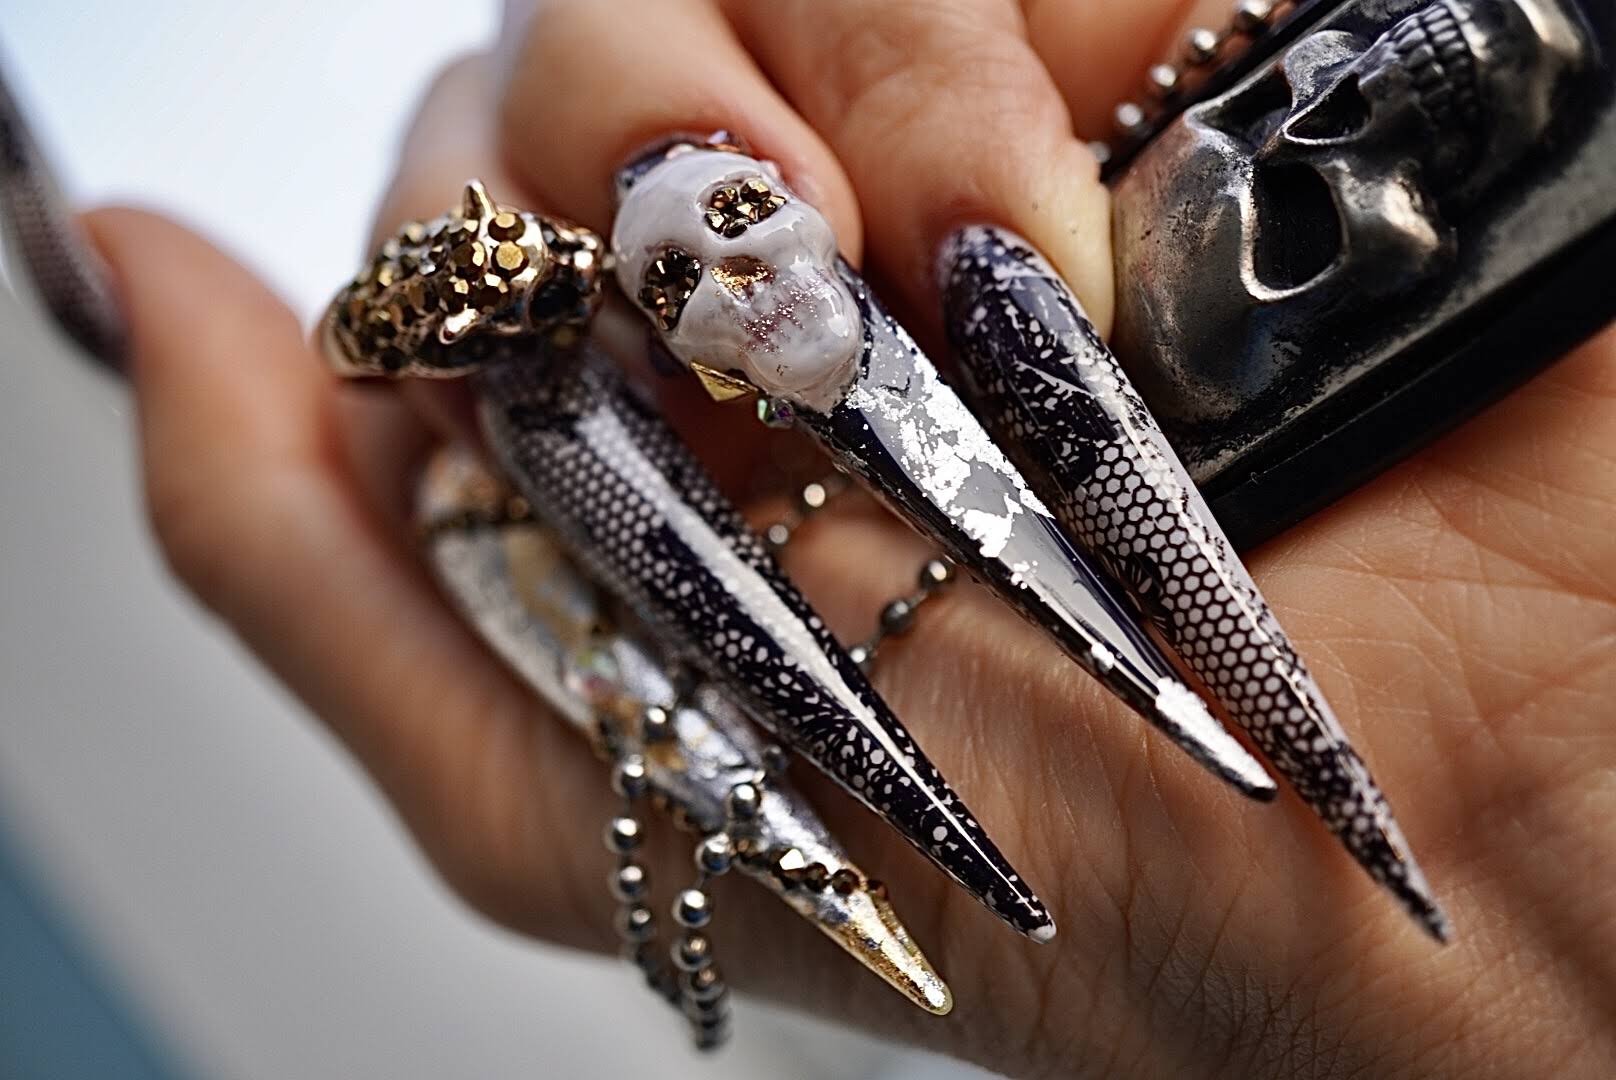 3. "Extreme Nail Art Tutorial: How to Create Jaw-Dropping Designs" - wide 10